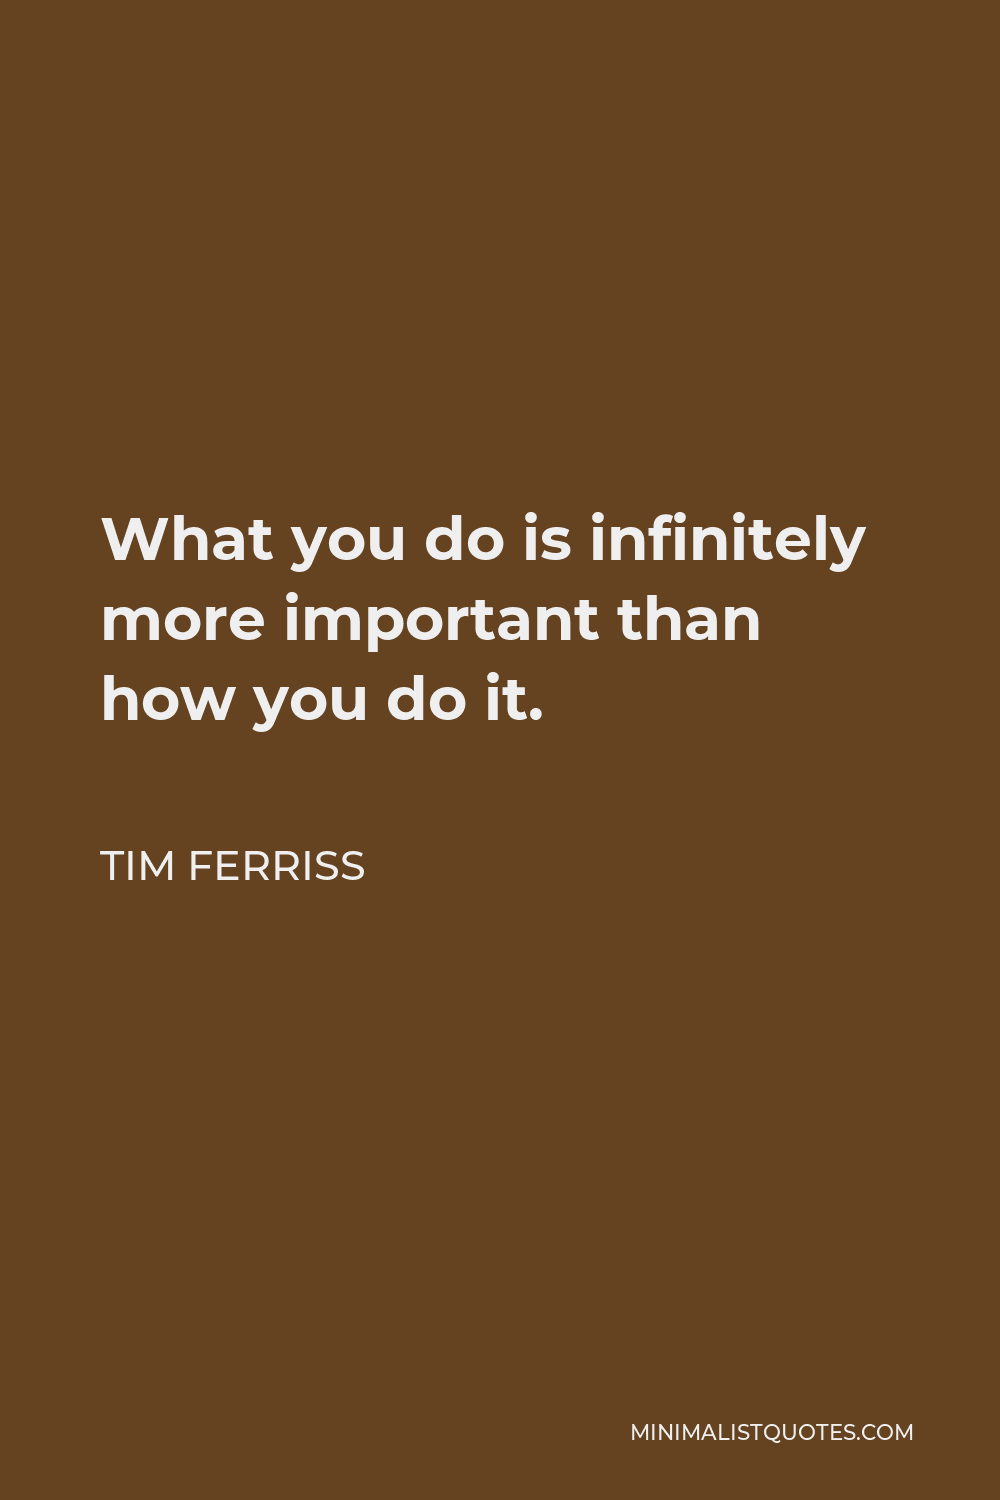 Tim Ferriss Quote - What you do is infinitely more important than how you do it.